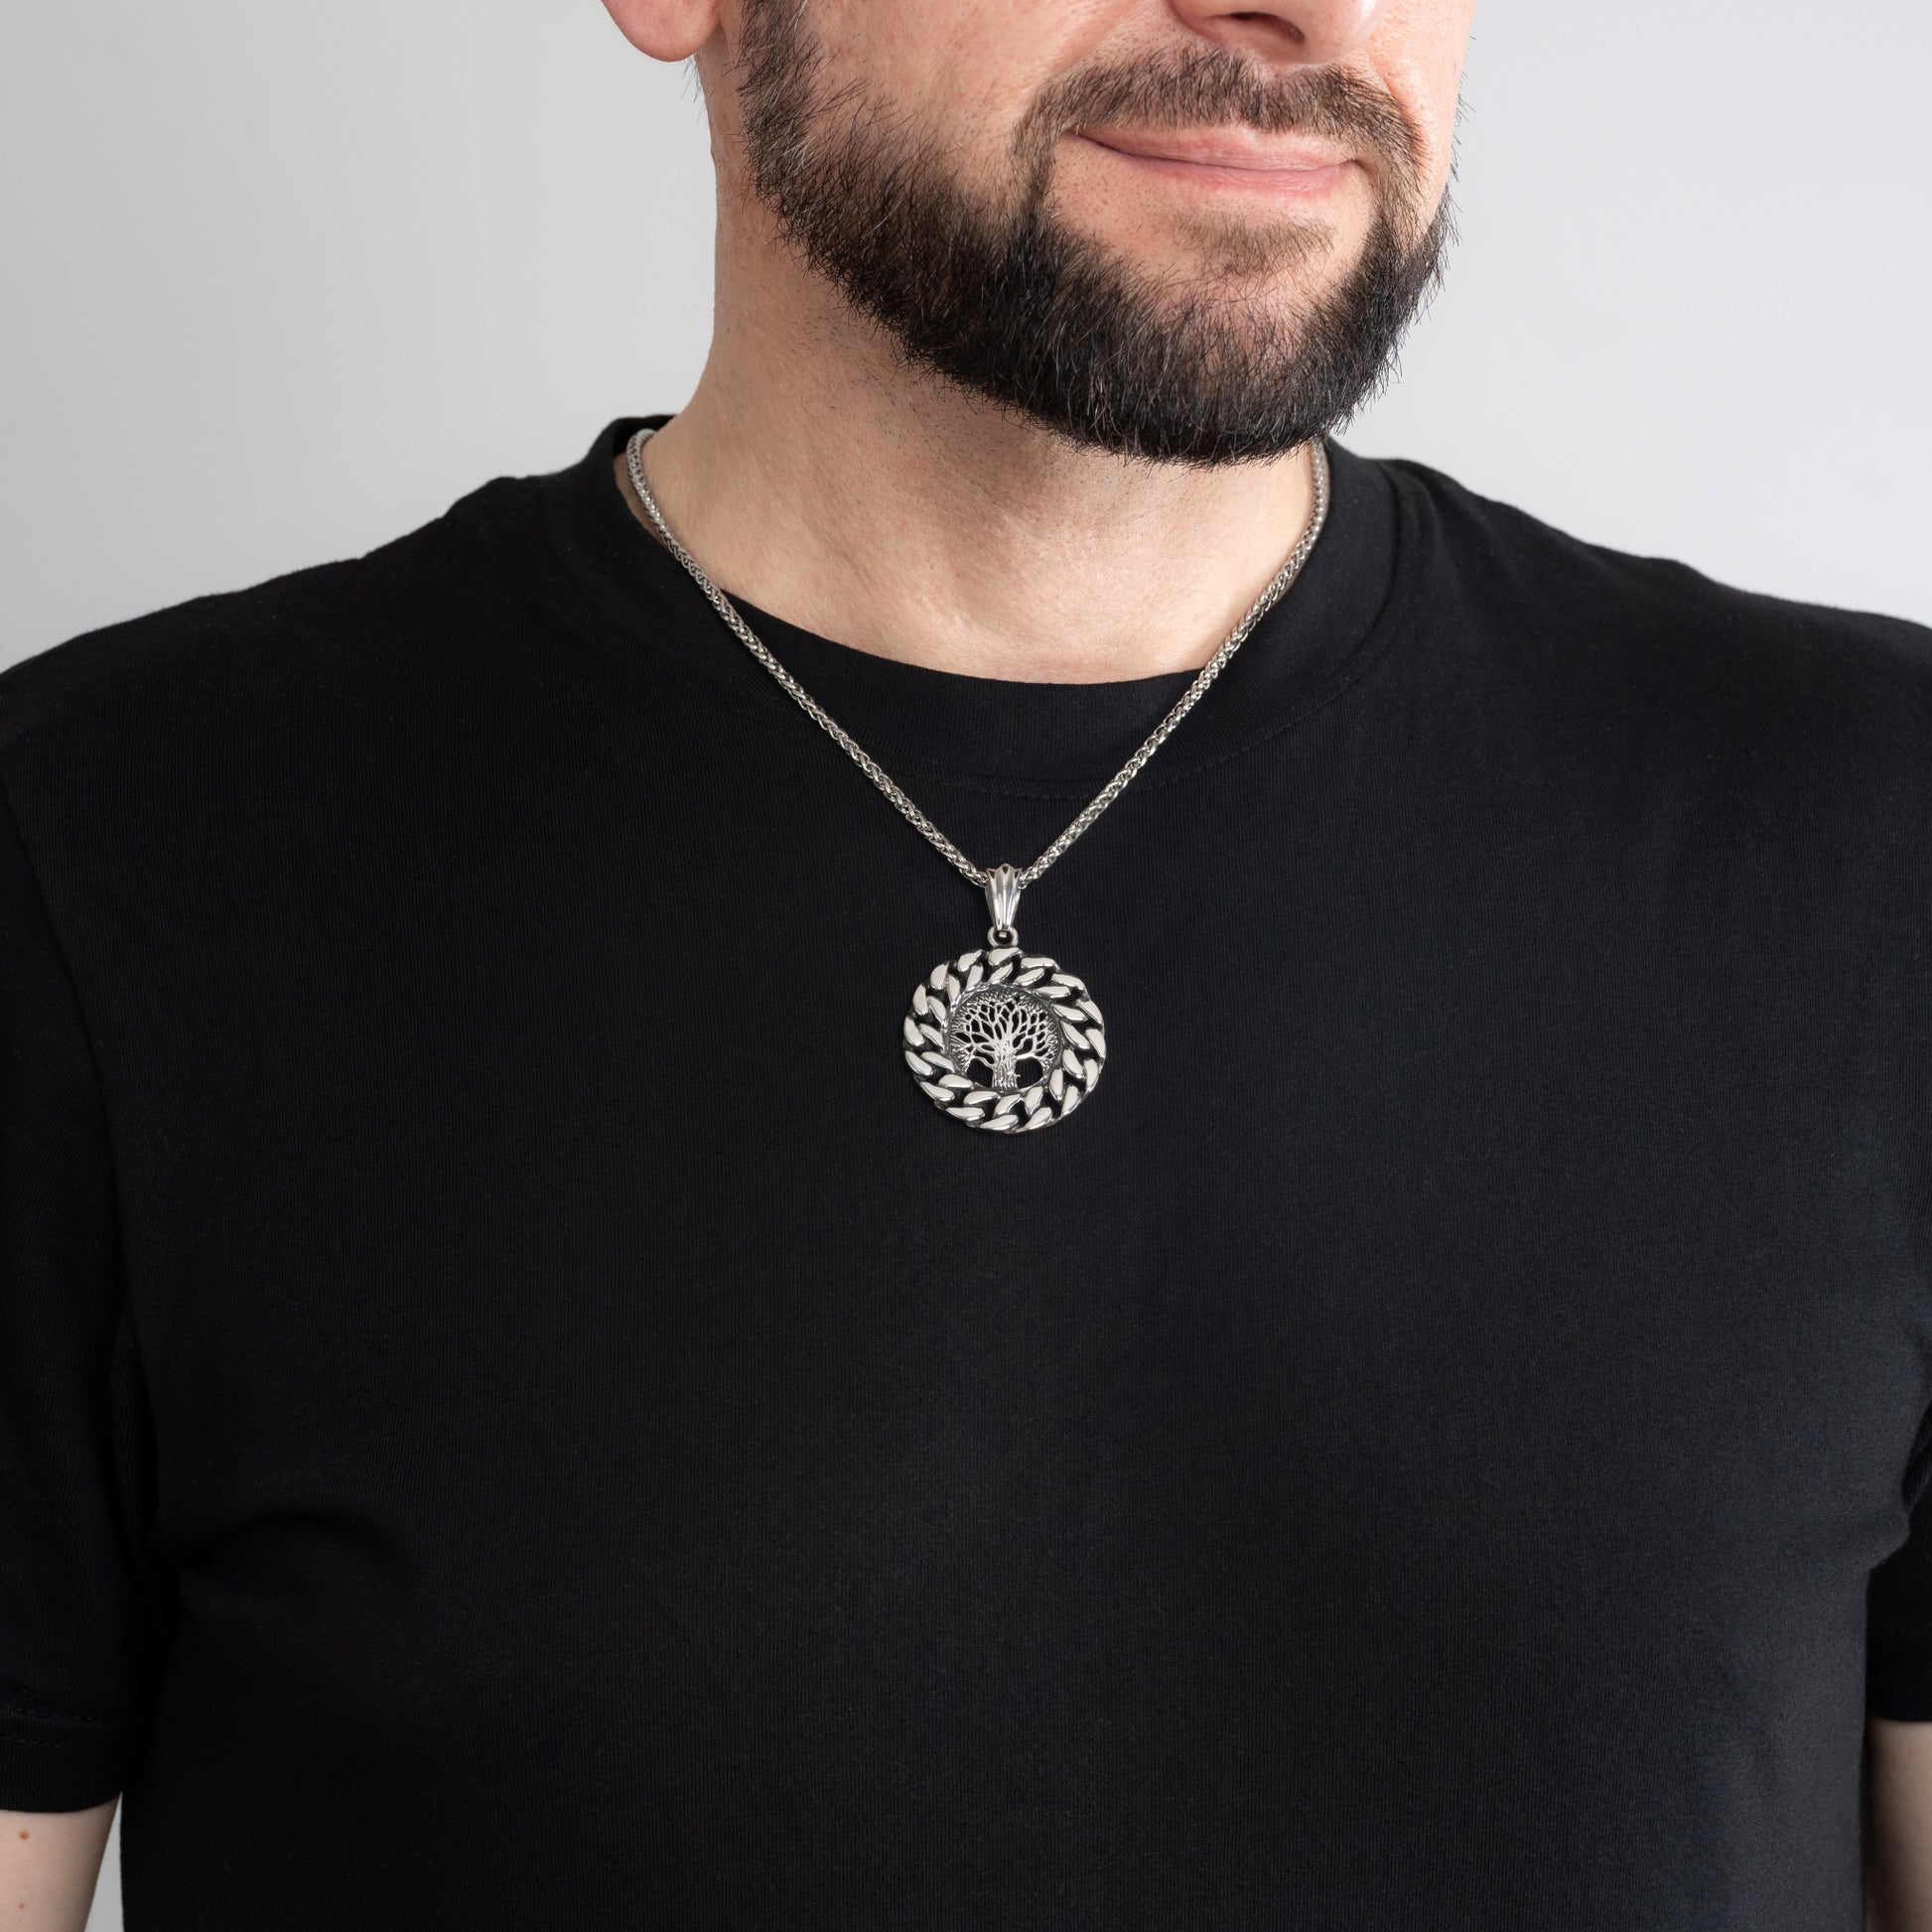 A male model in a black t-shirt wearing a Vintage Tree of Life Silver Pendant with a 3mm Silver Spiga chain 20 inches.